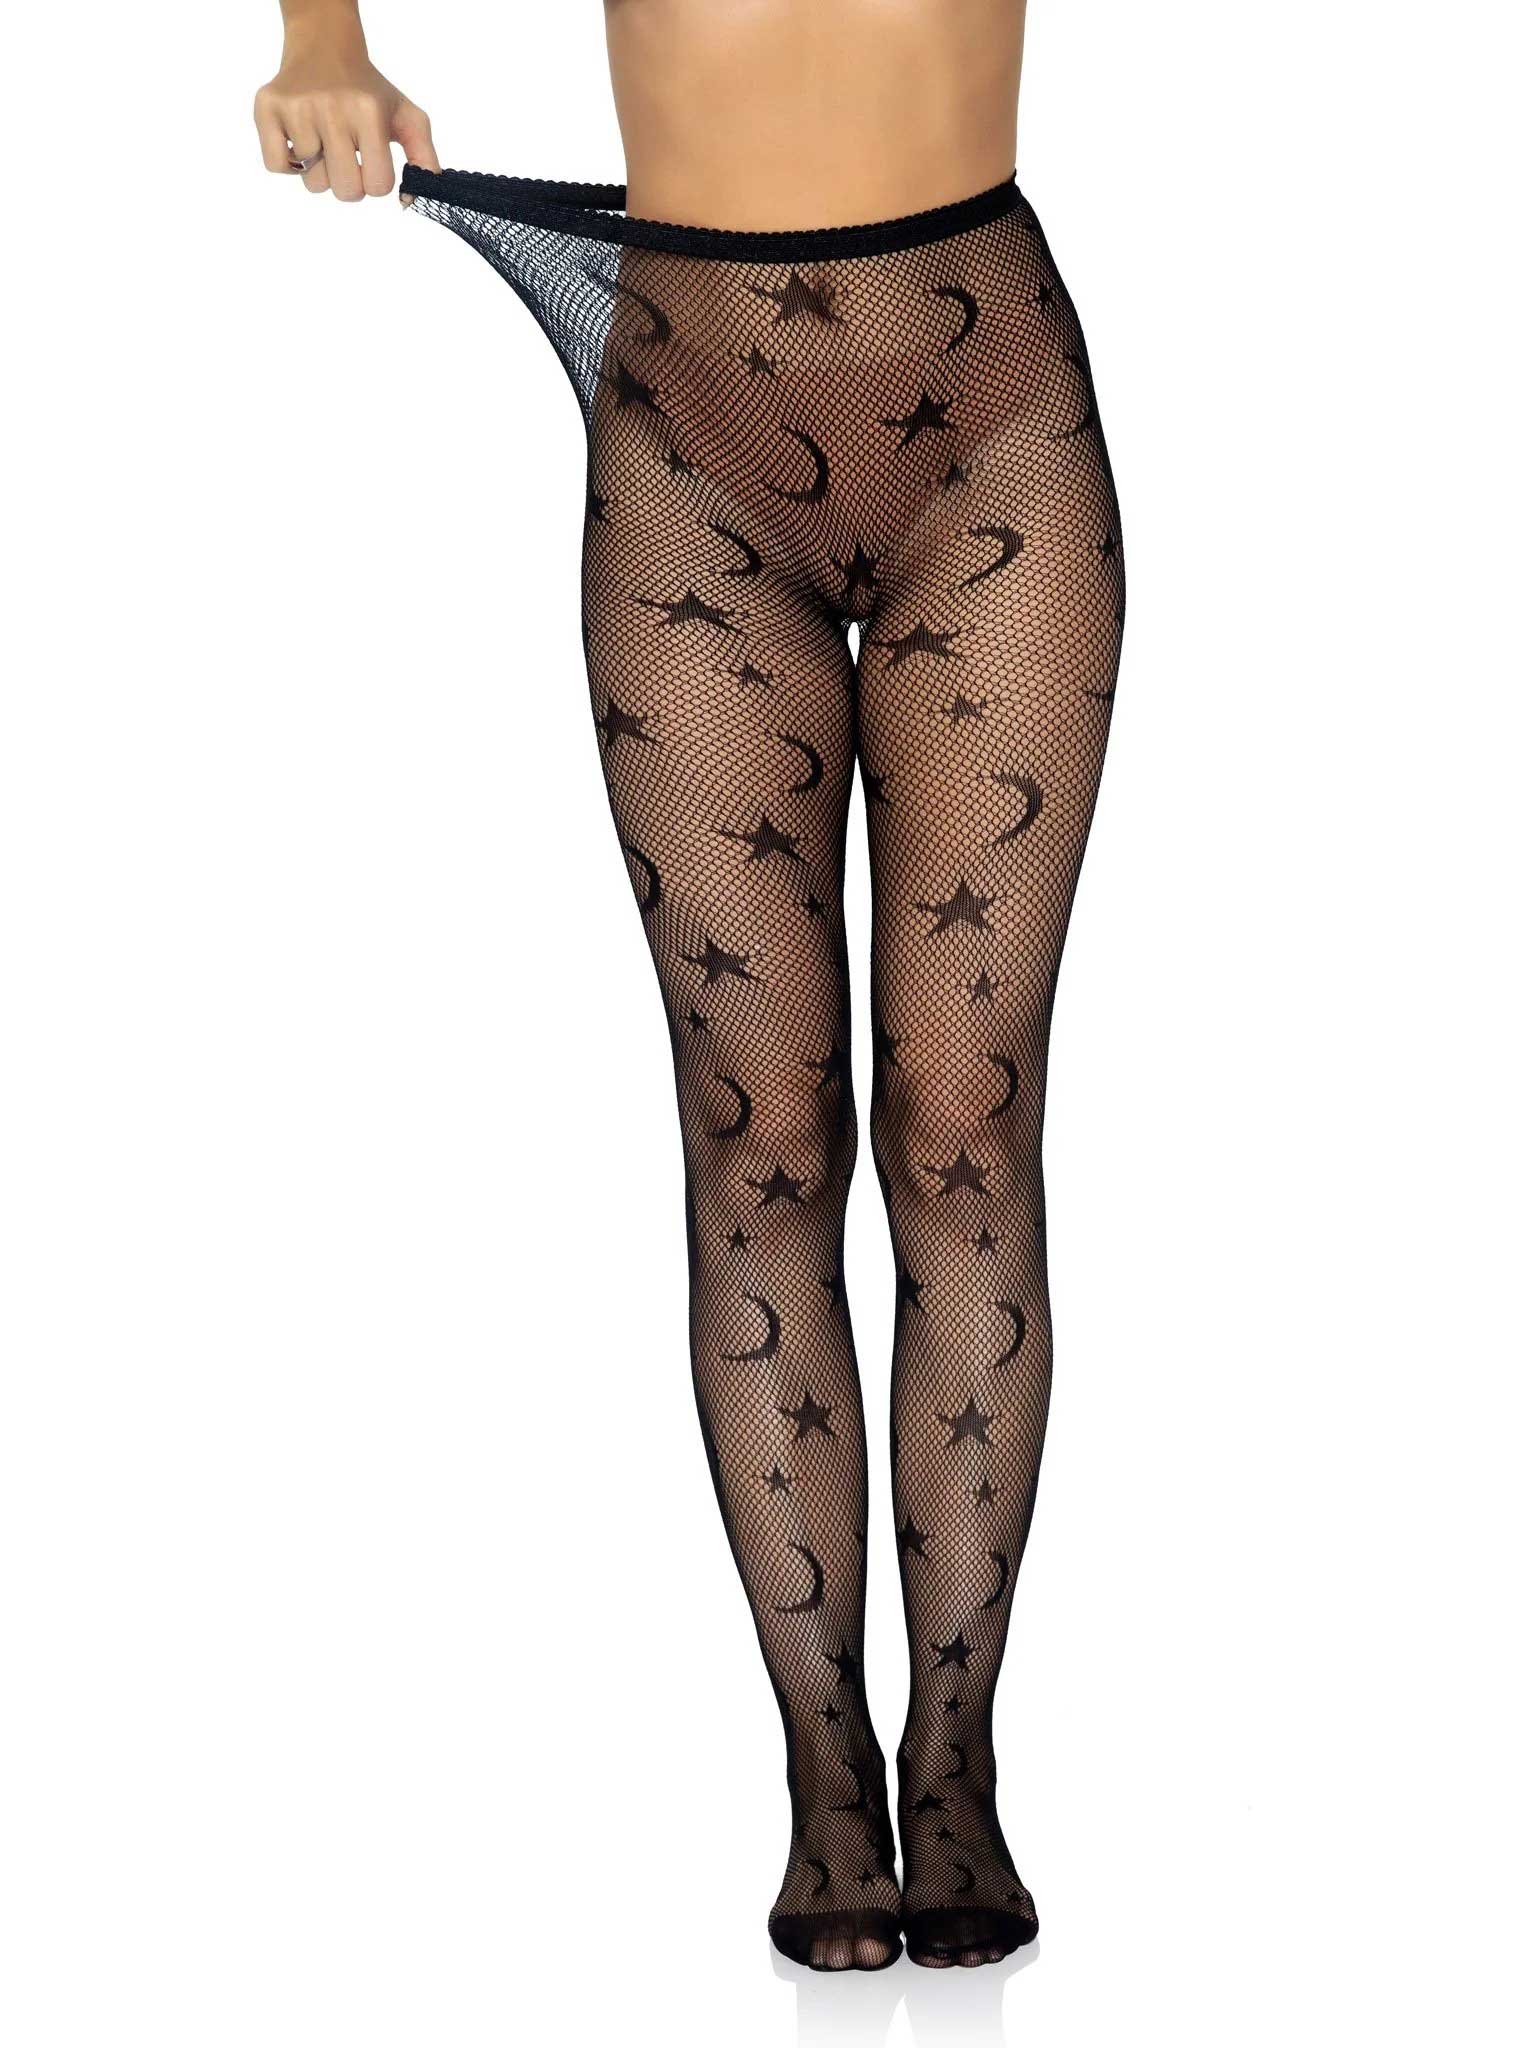 Celestial Net Tights - One Size - Black-3